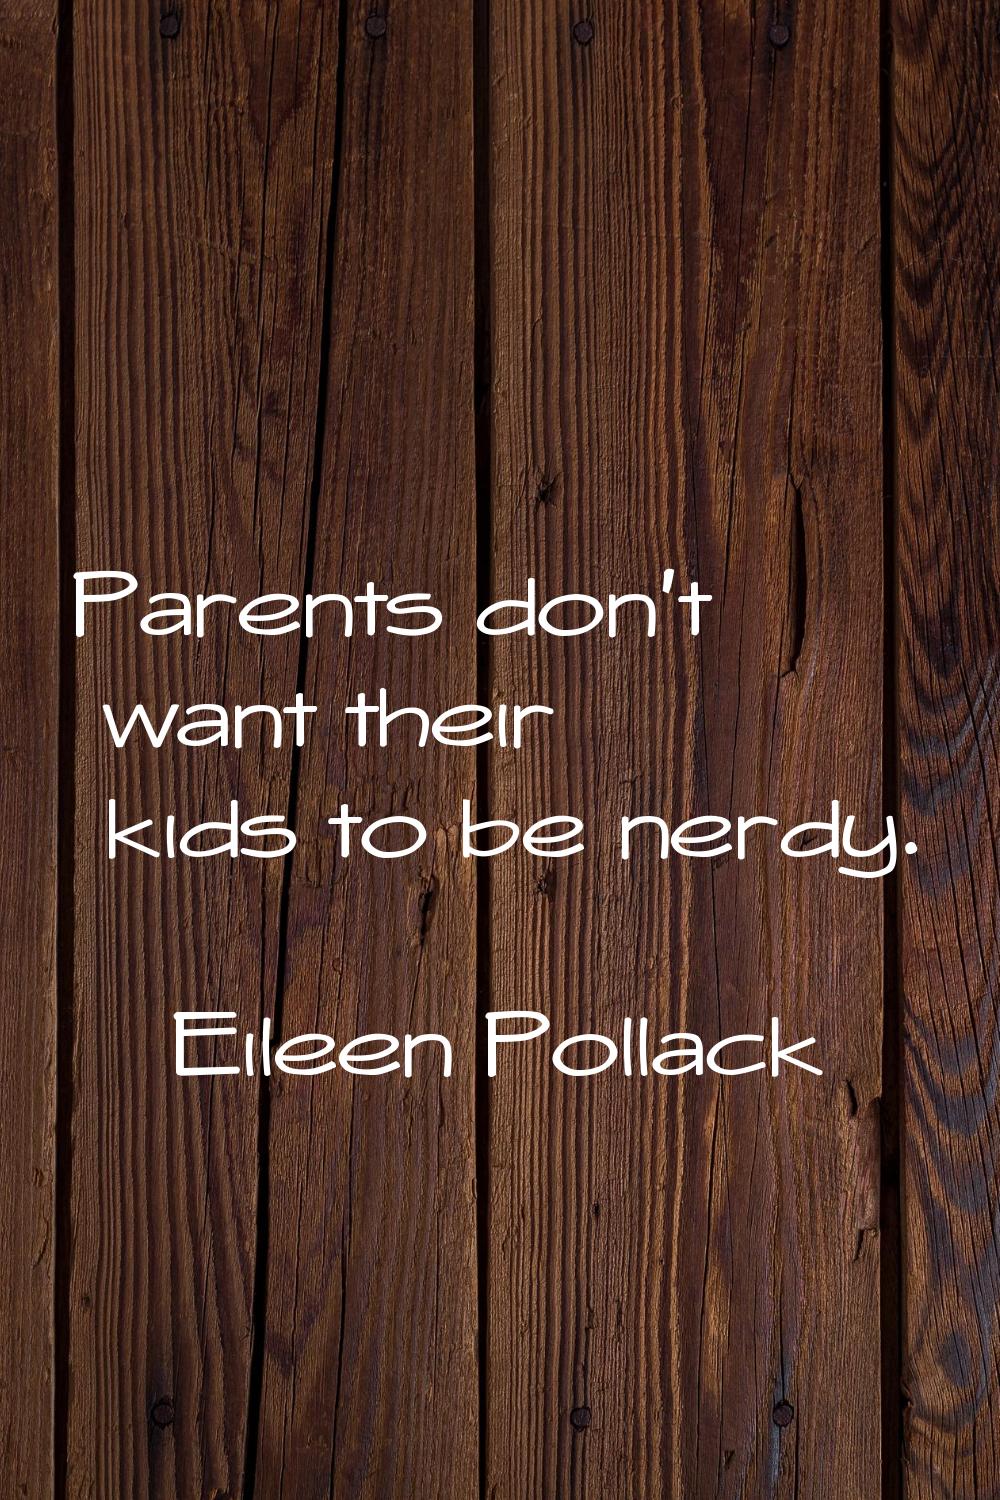 Parents don't want their kids to be nerdy.